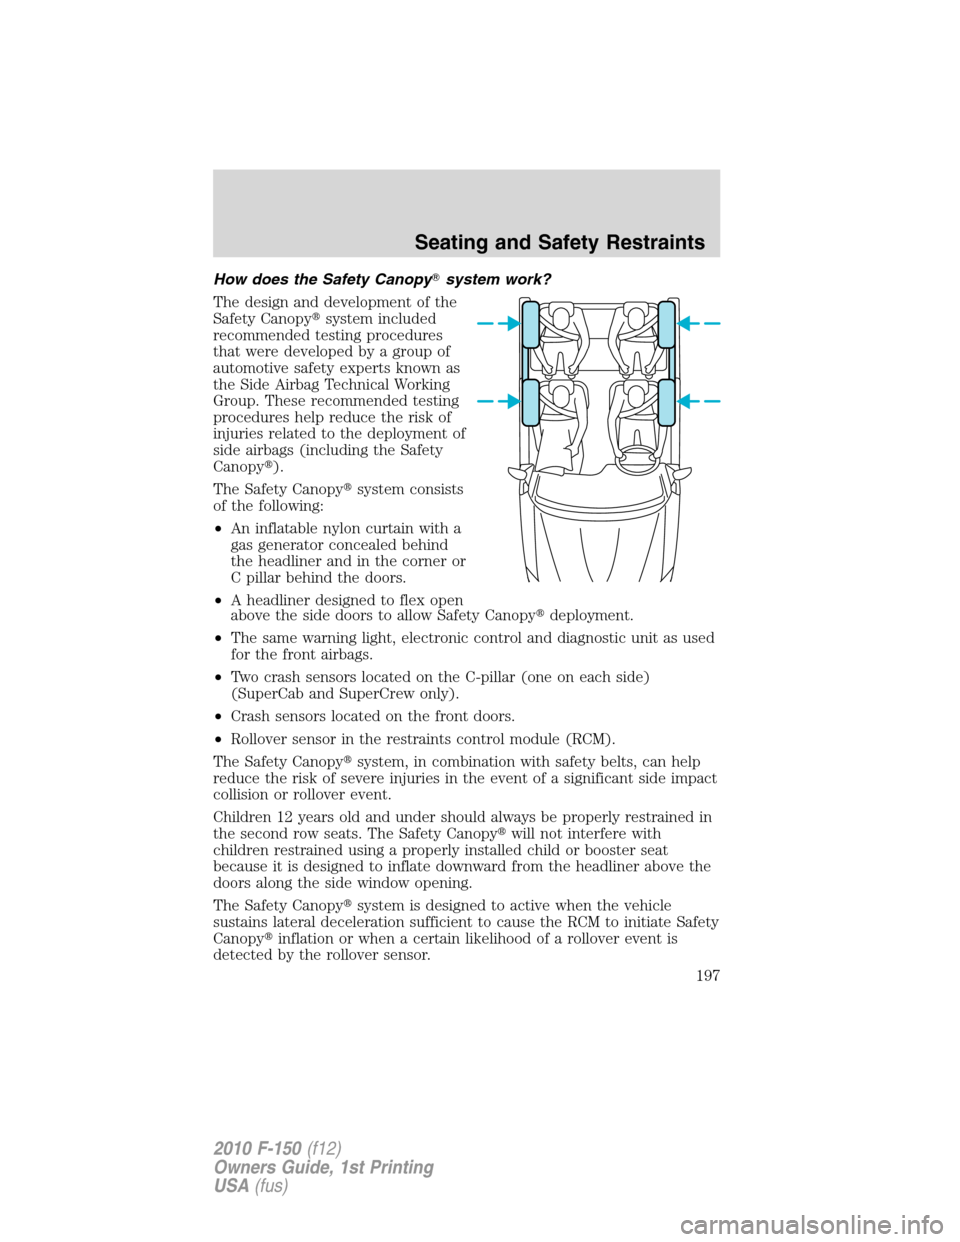 FORD F150 2010 12.G Owners Manual How does the Safety Canopysystem work?
The design and development of the
Safety Canopysystem included
recommended testing procedures
that were developed by a group of
automotive safety experts known